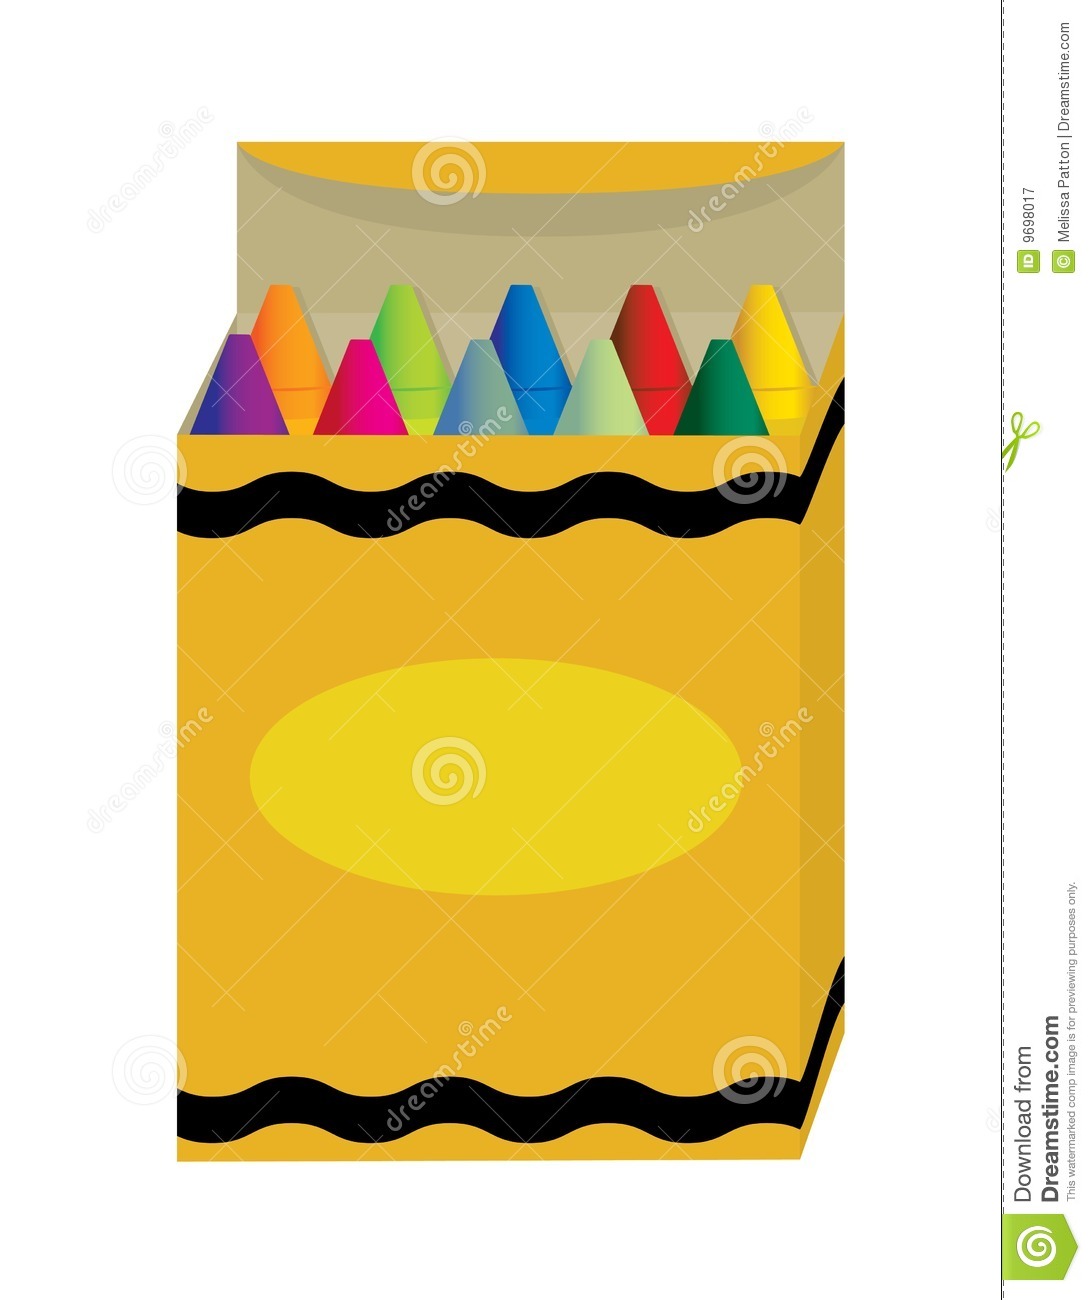 Box of crayons clipart